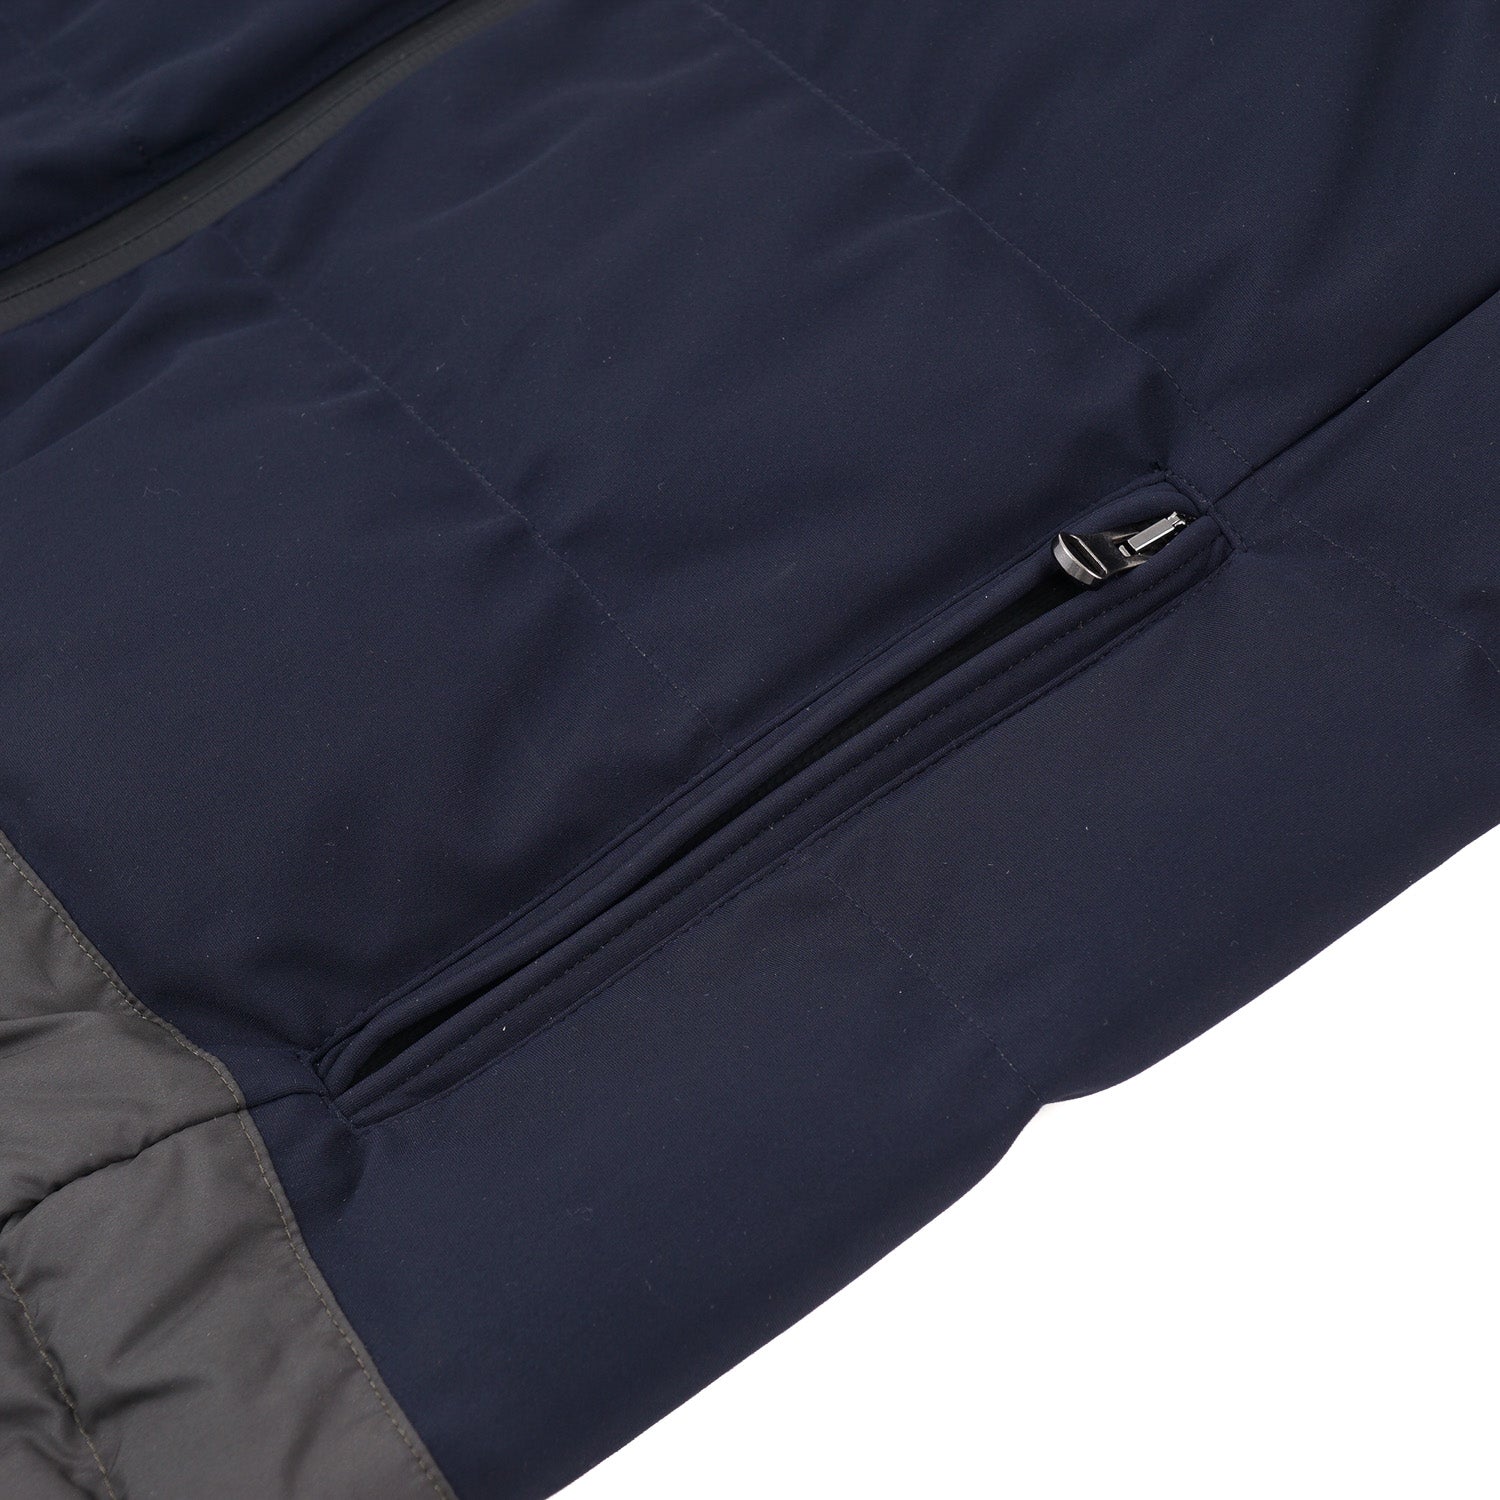 Kiton Quilted Down-Filled Puffer Vest - Top Shelf Apparel